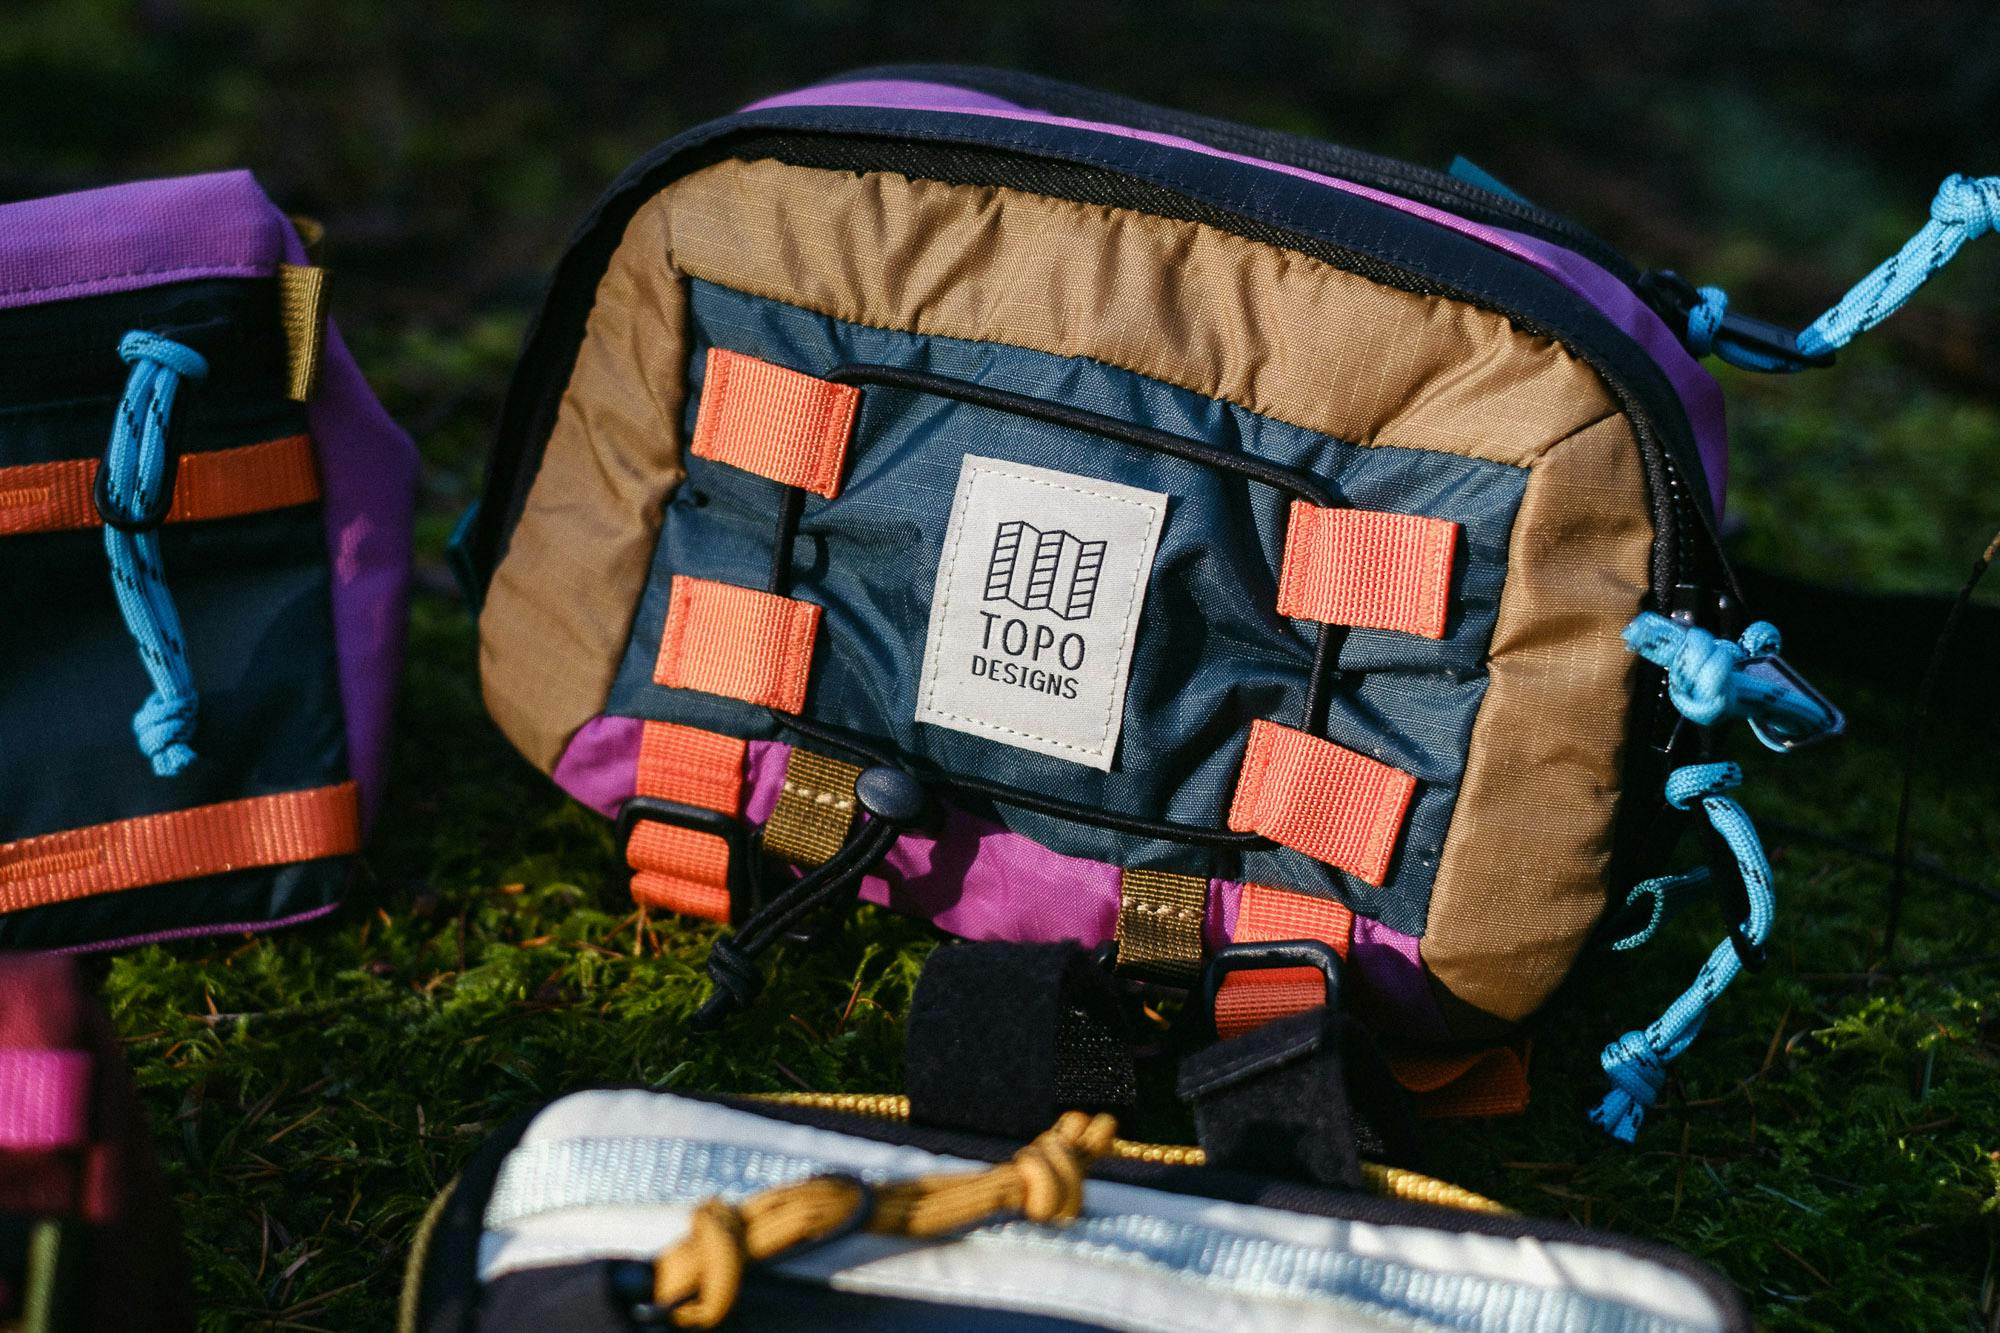 The Topo Designs discontinued hip pack.